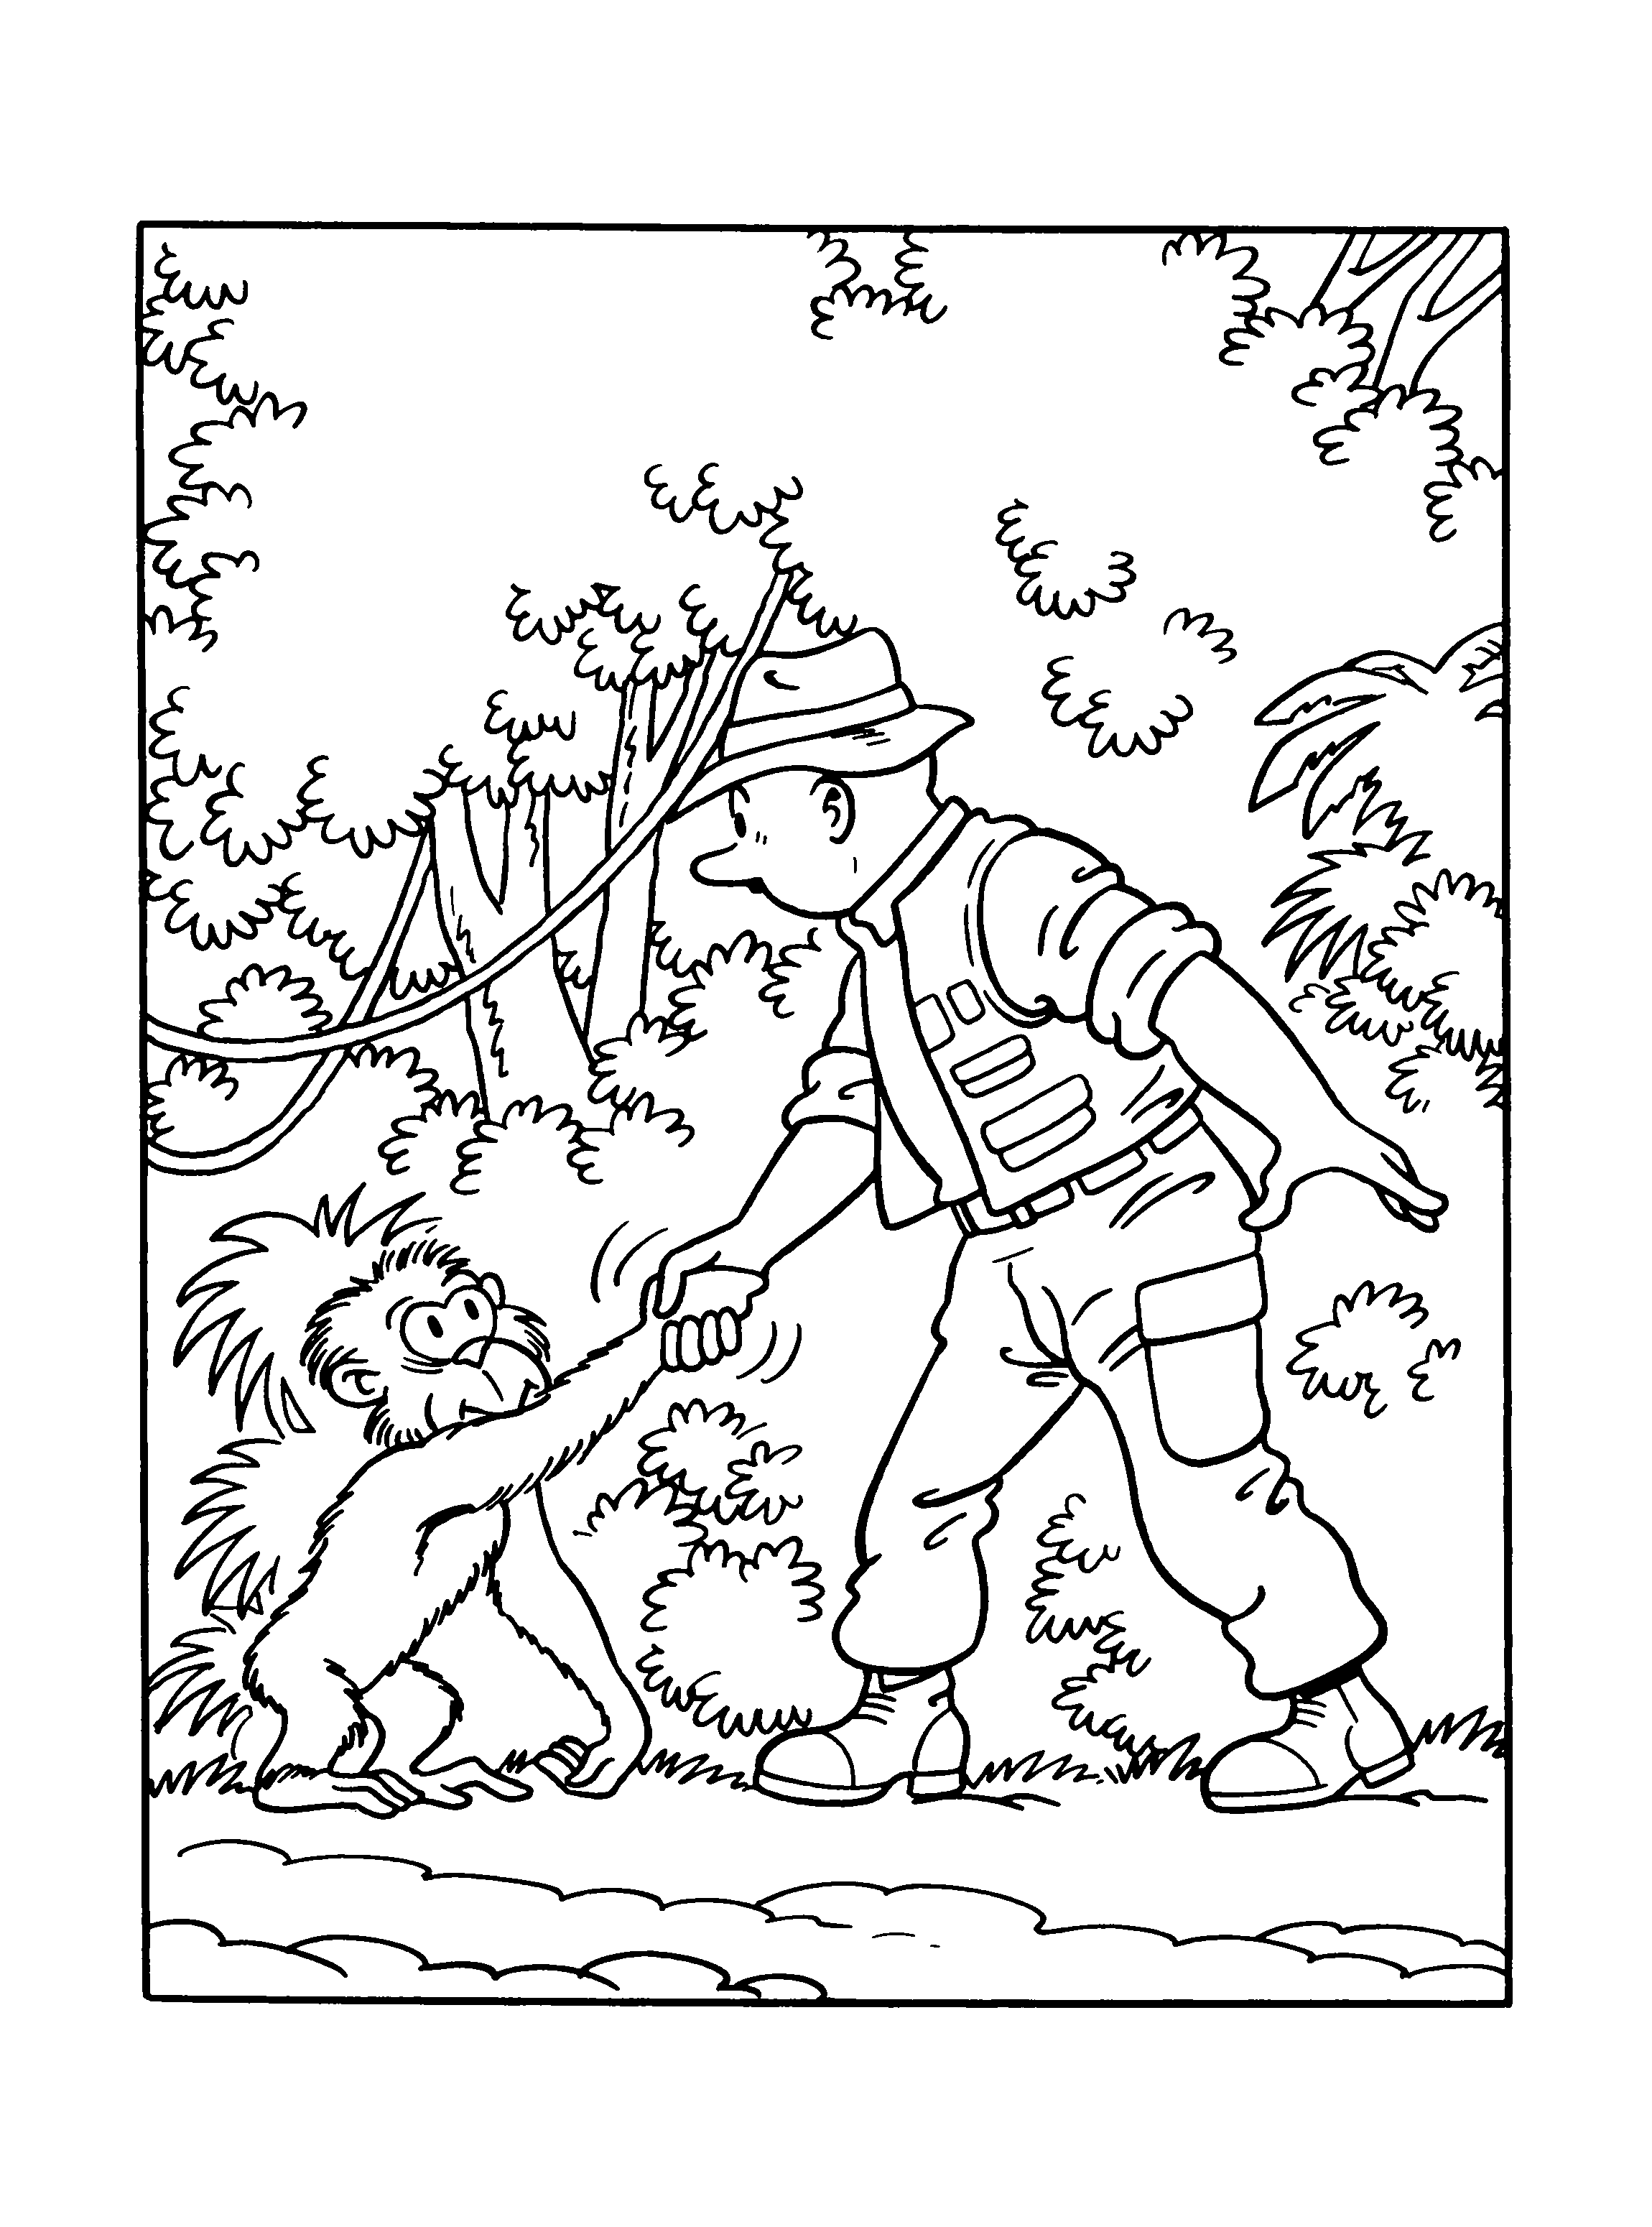 Coloring Page - Spike and suzy coloring pages 52